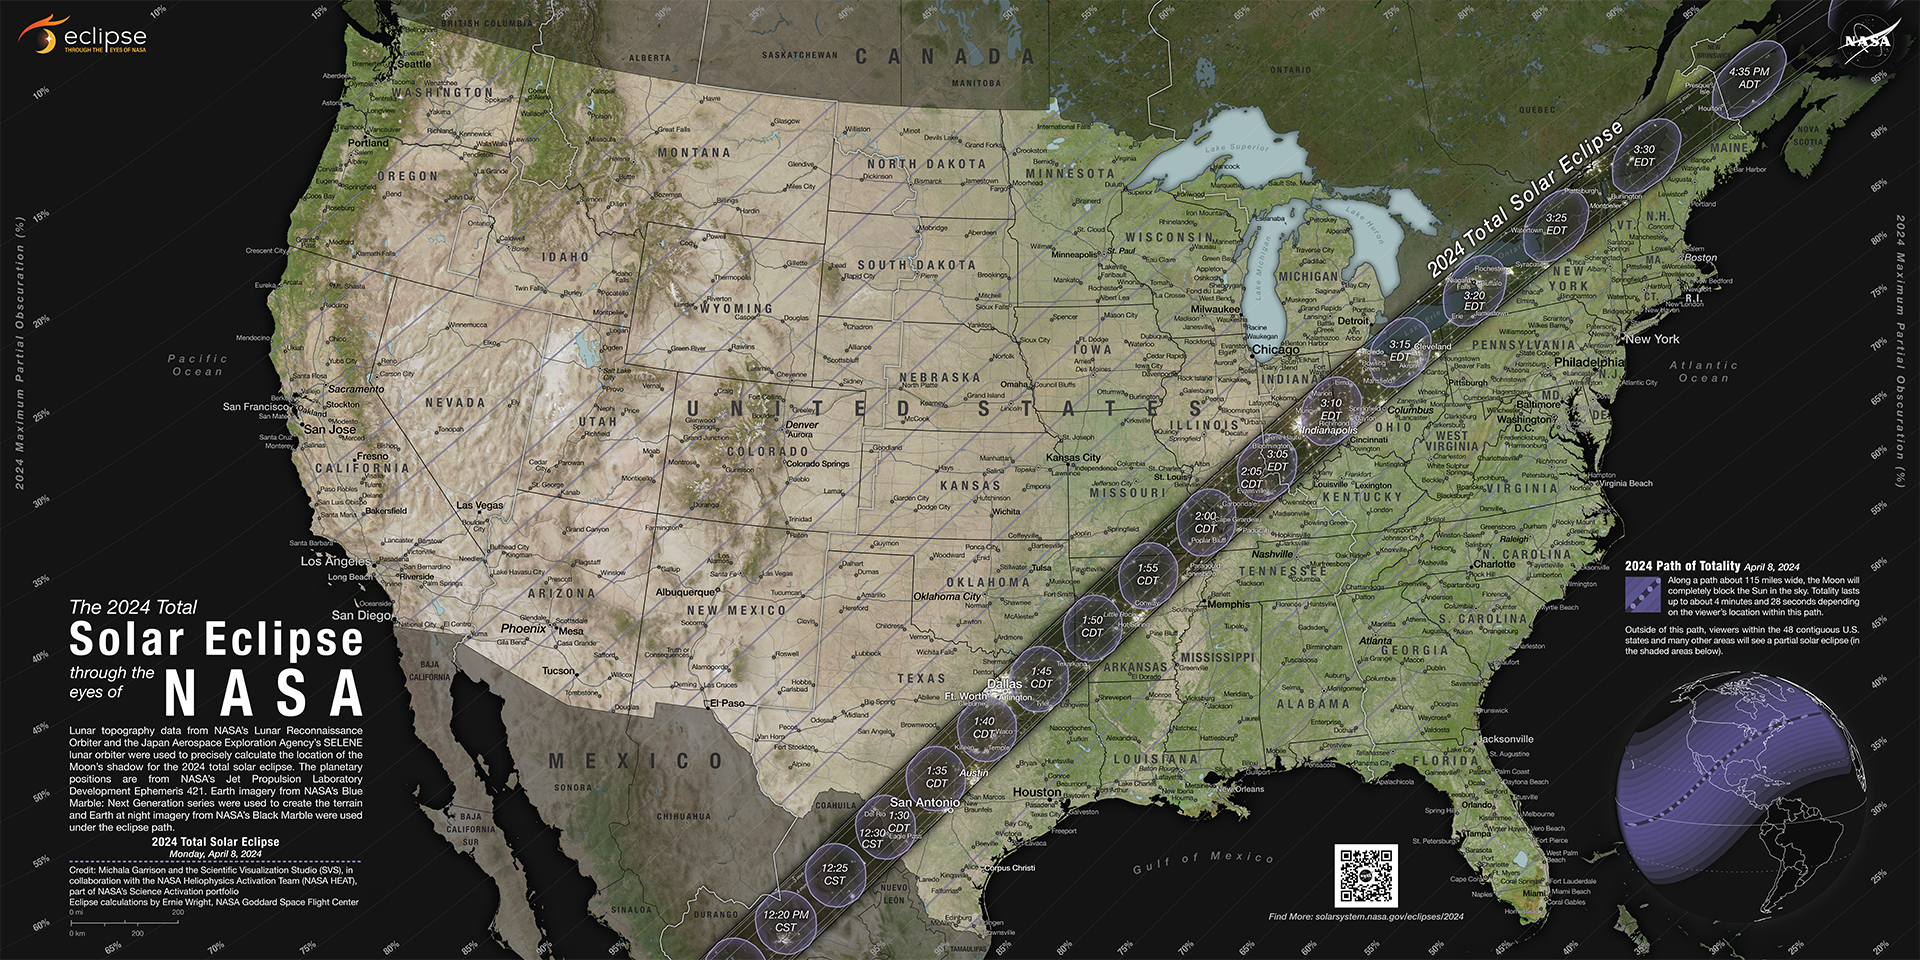 A map of the United States showing the path of a total solar eclipse with a series of circular icons indicating points of its progression across various states.